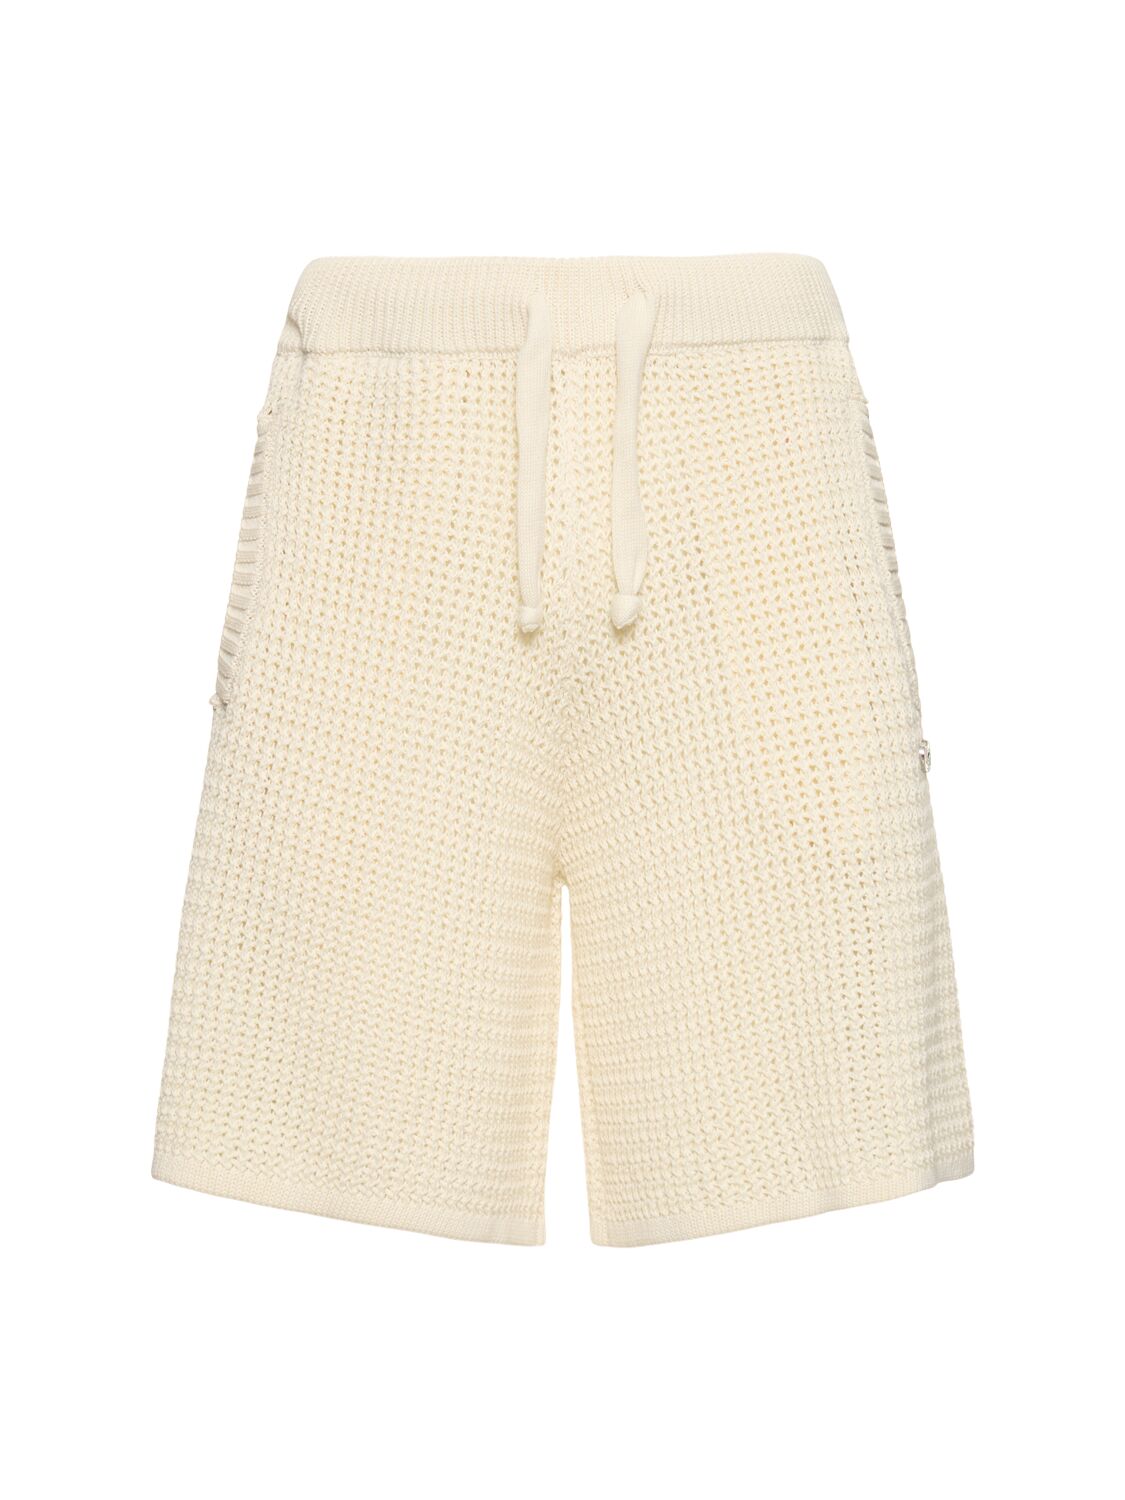 Image of Knitted Crochet Shorts